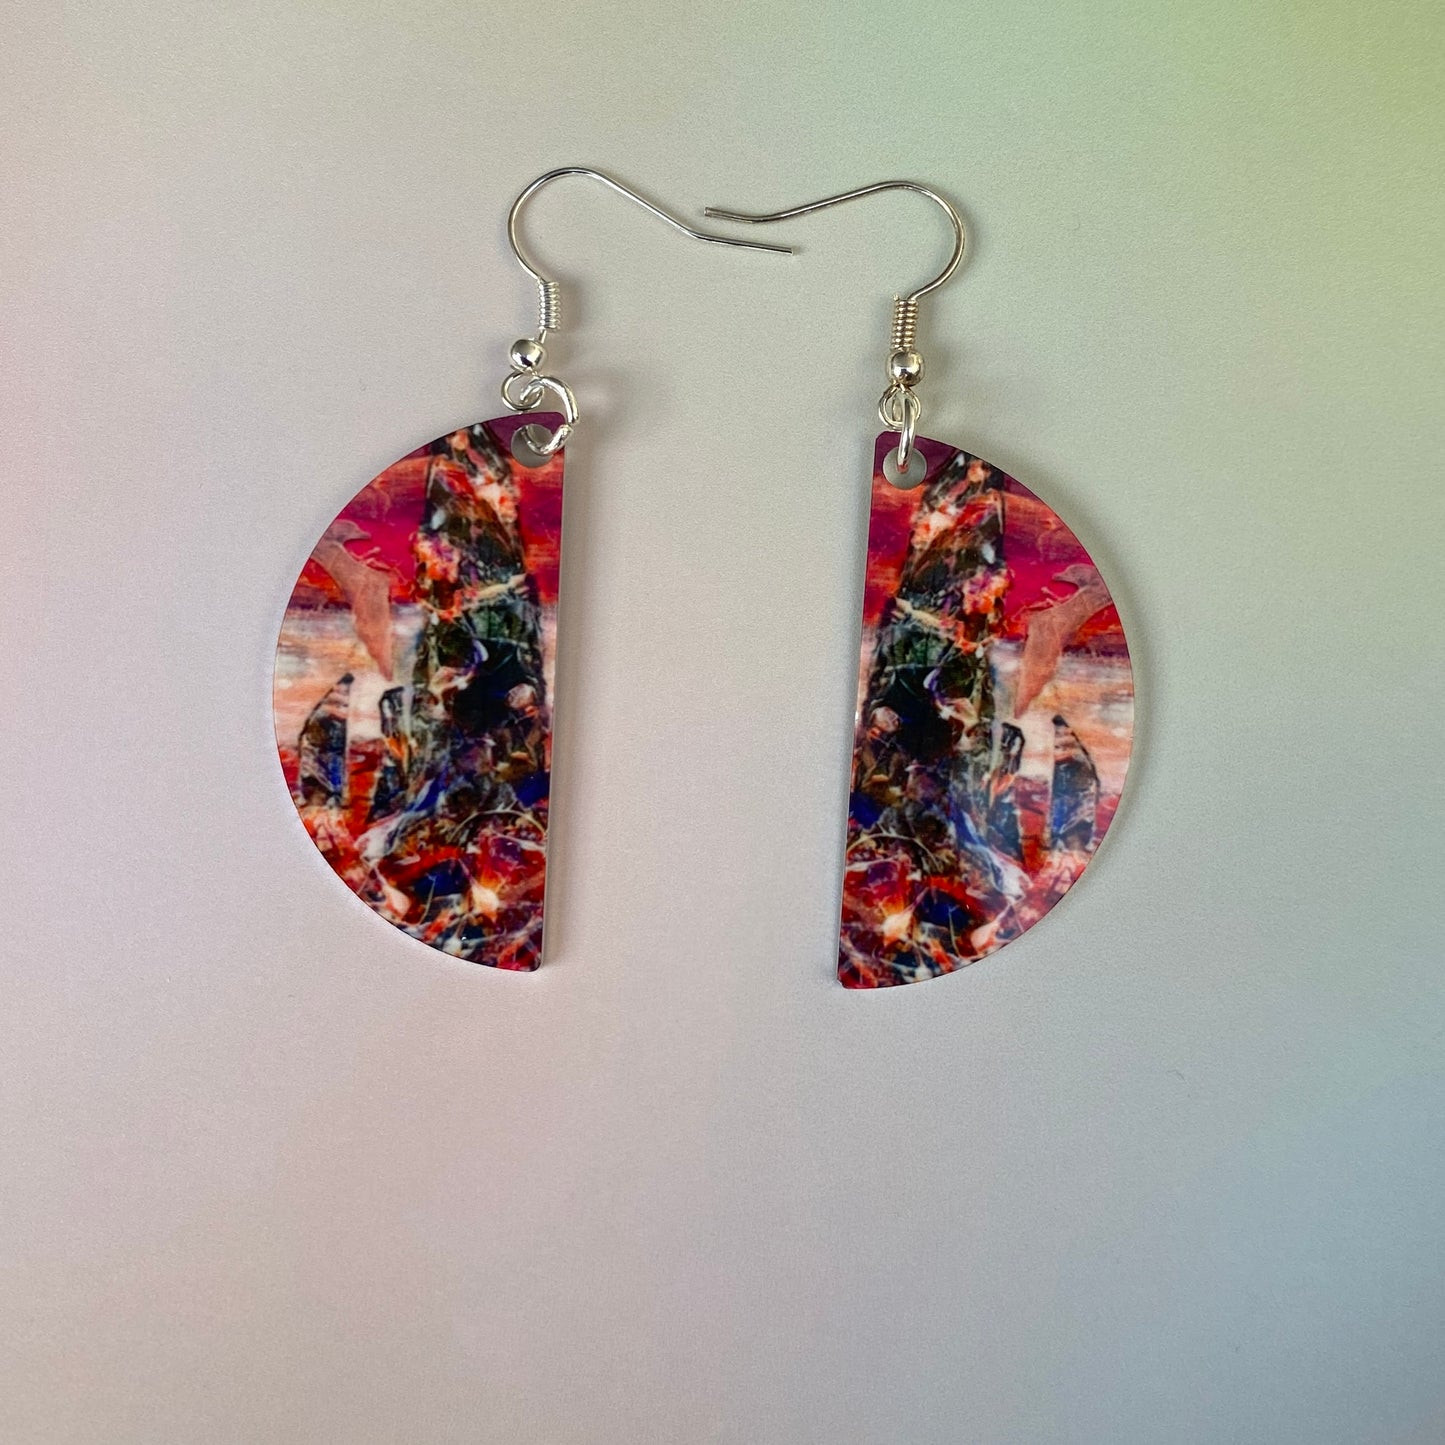 A pair of earrings design Wild sunset at The Ring of Brodgar by Orkney artist Jane Glue, Scotland